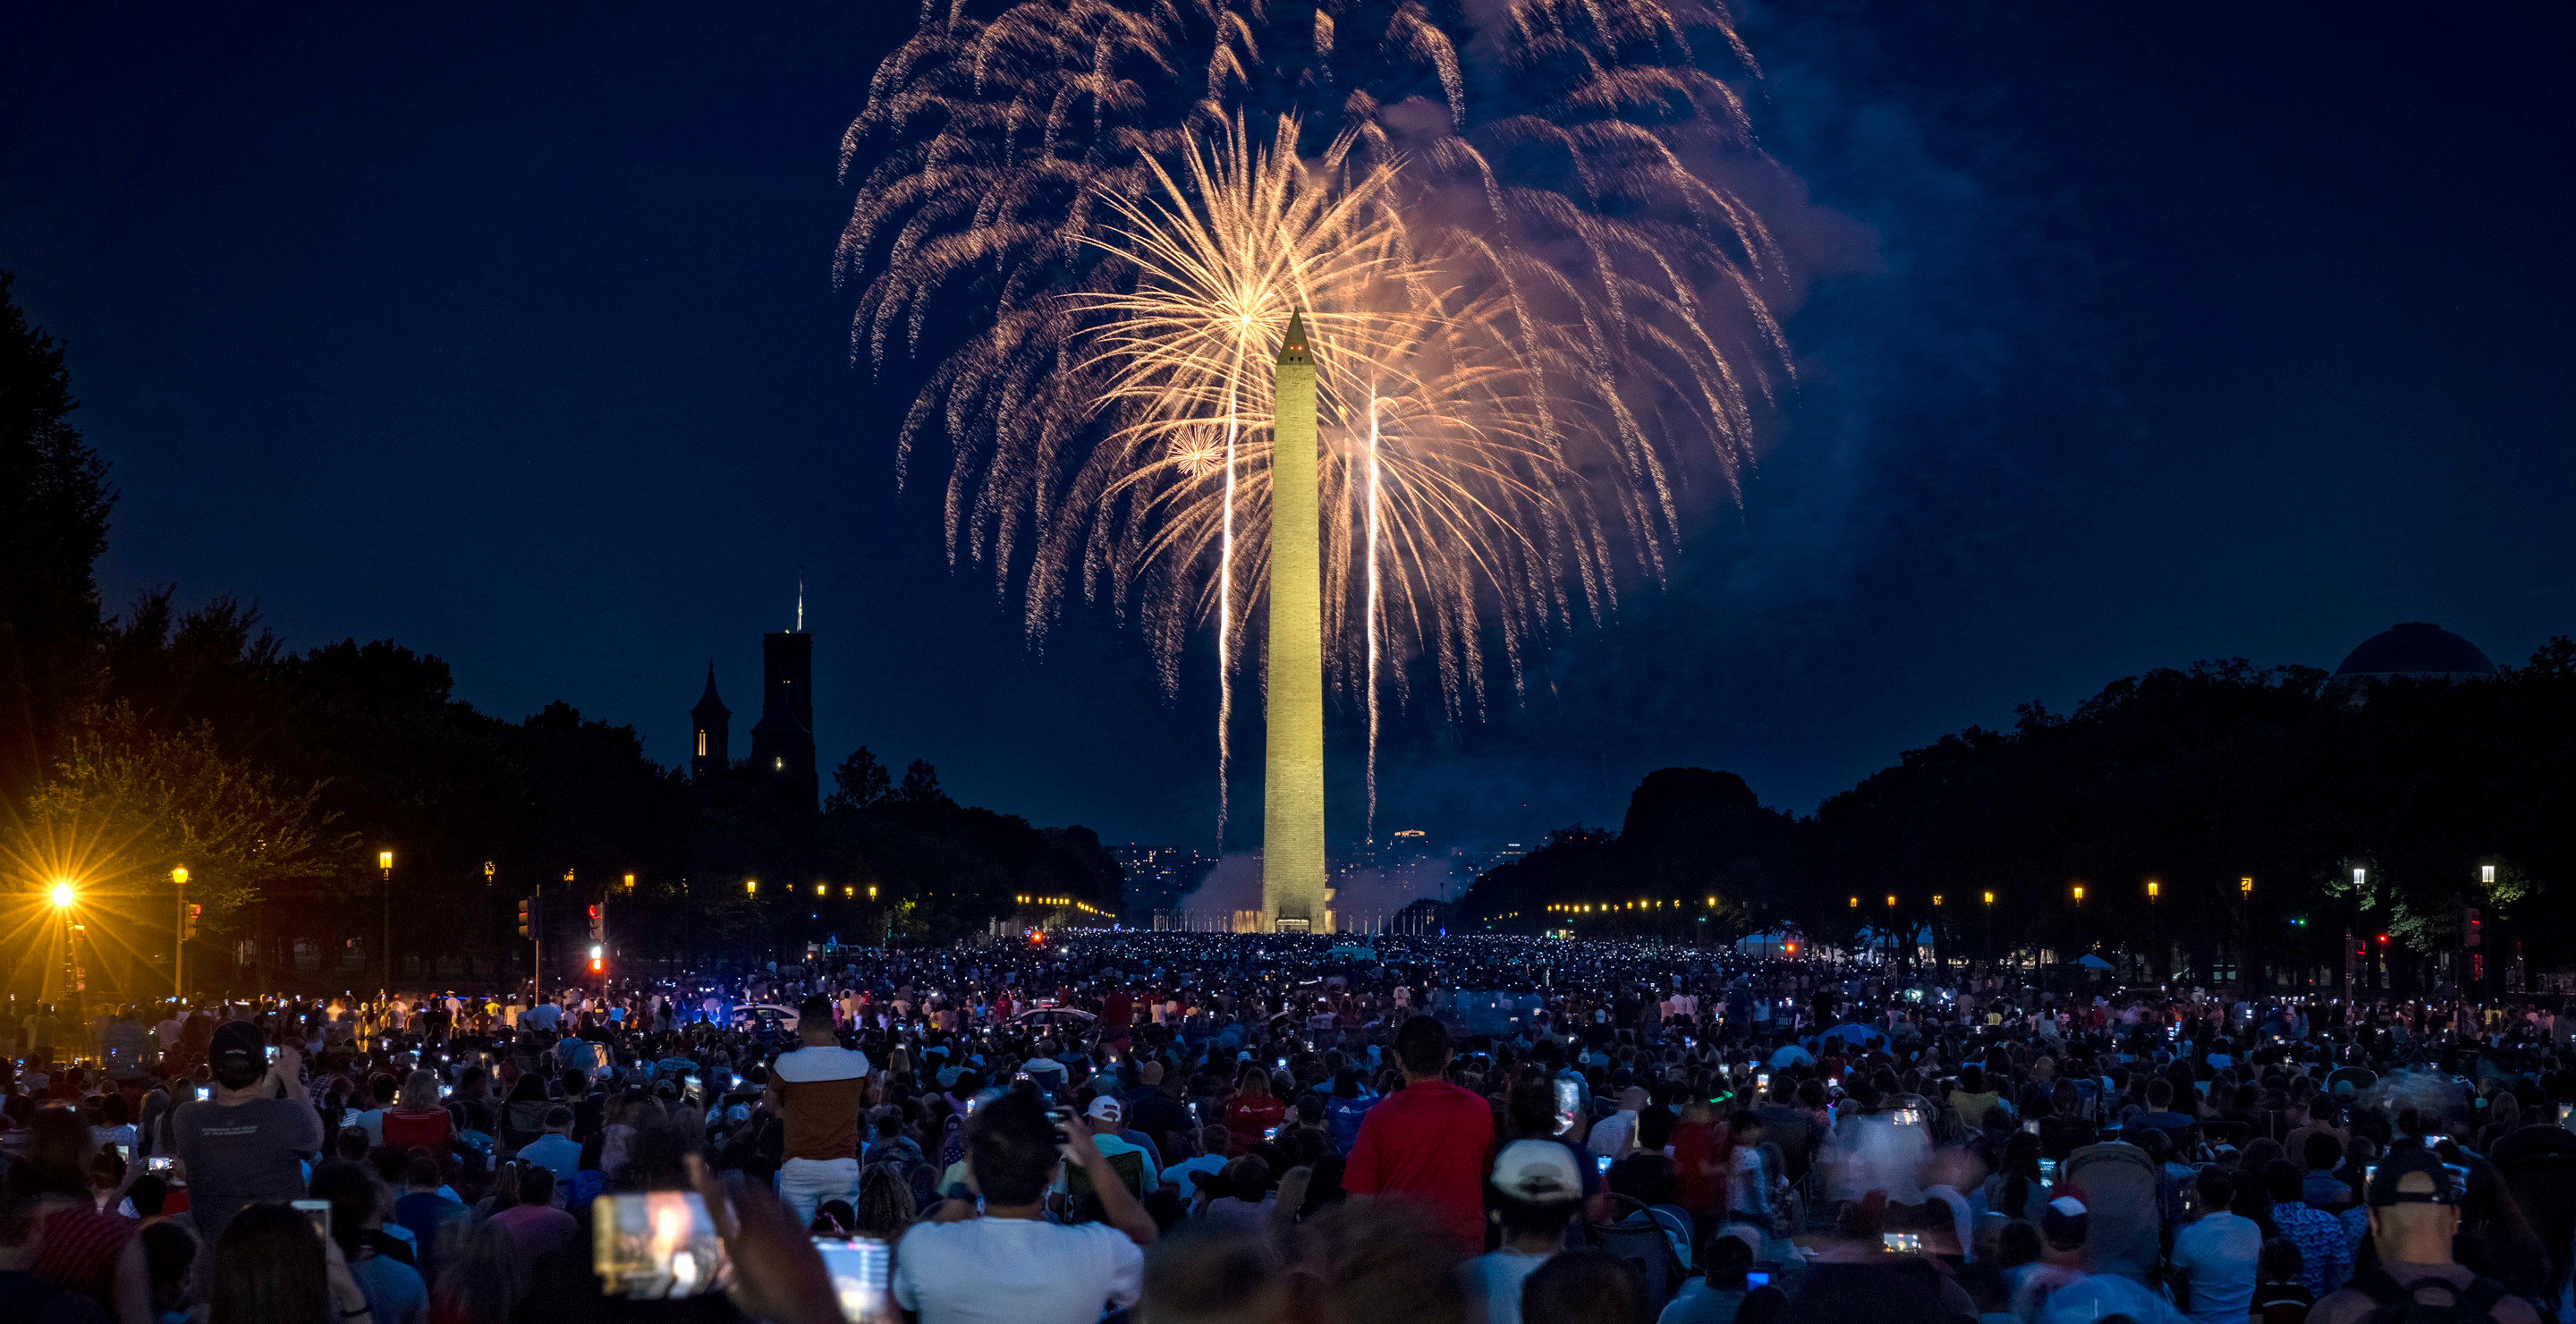 Where To Find The Best 4th of July Fireworks Displays In Every State